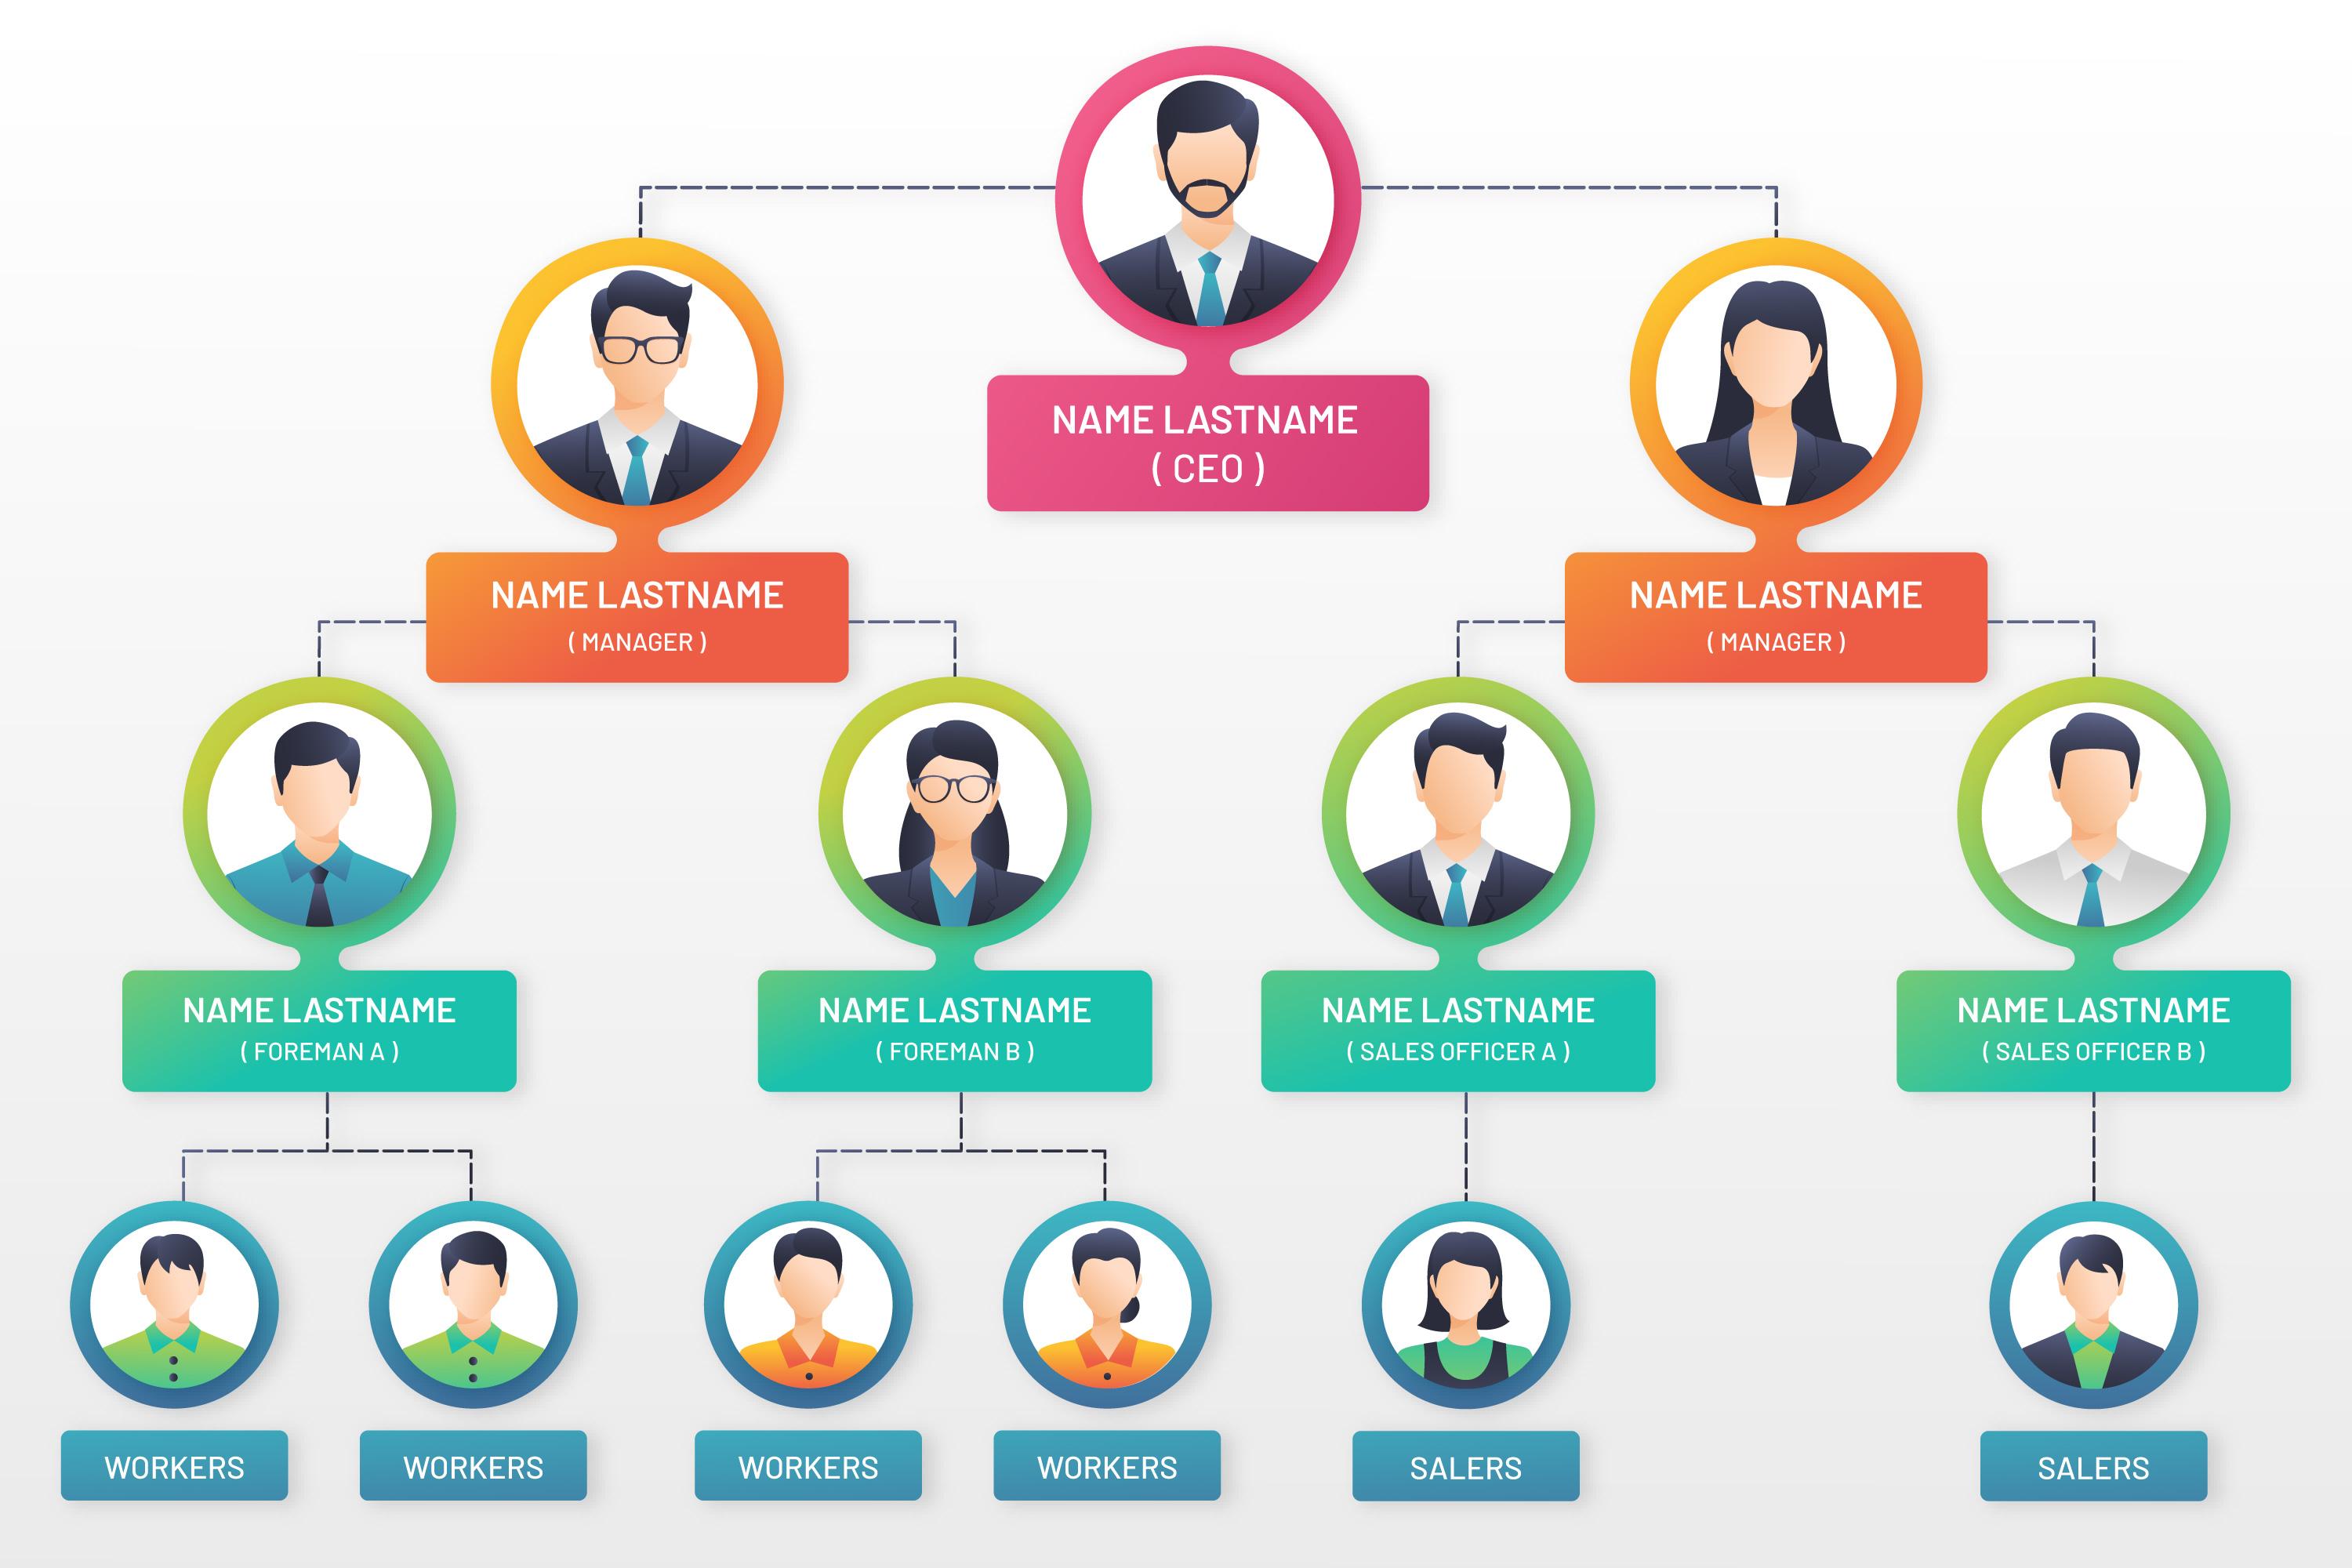 hierarchical organizational chart example